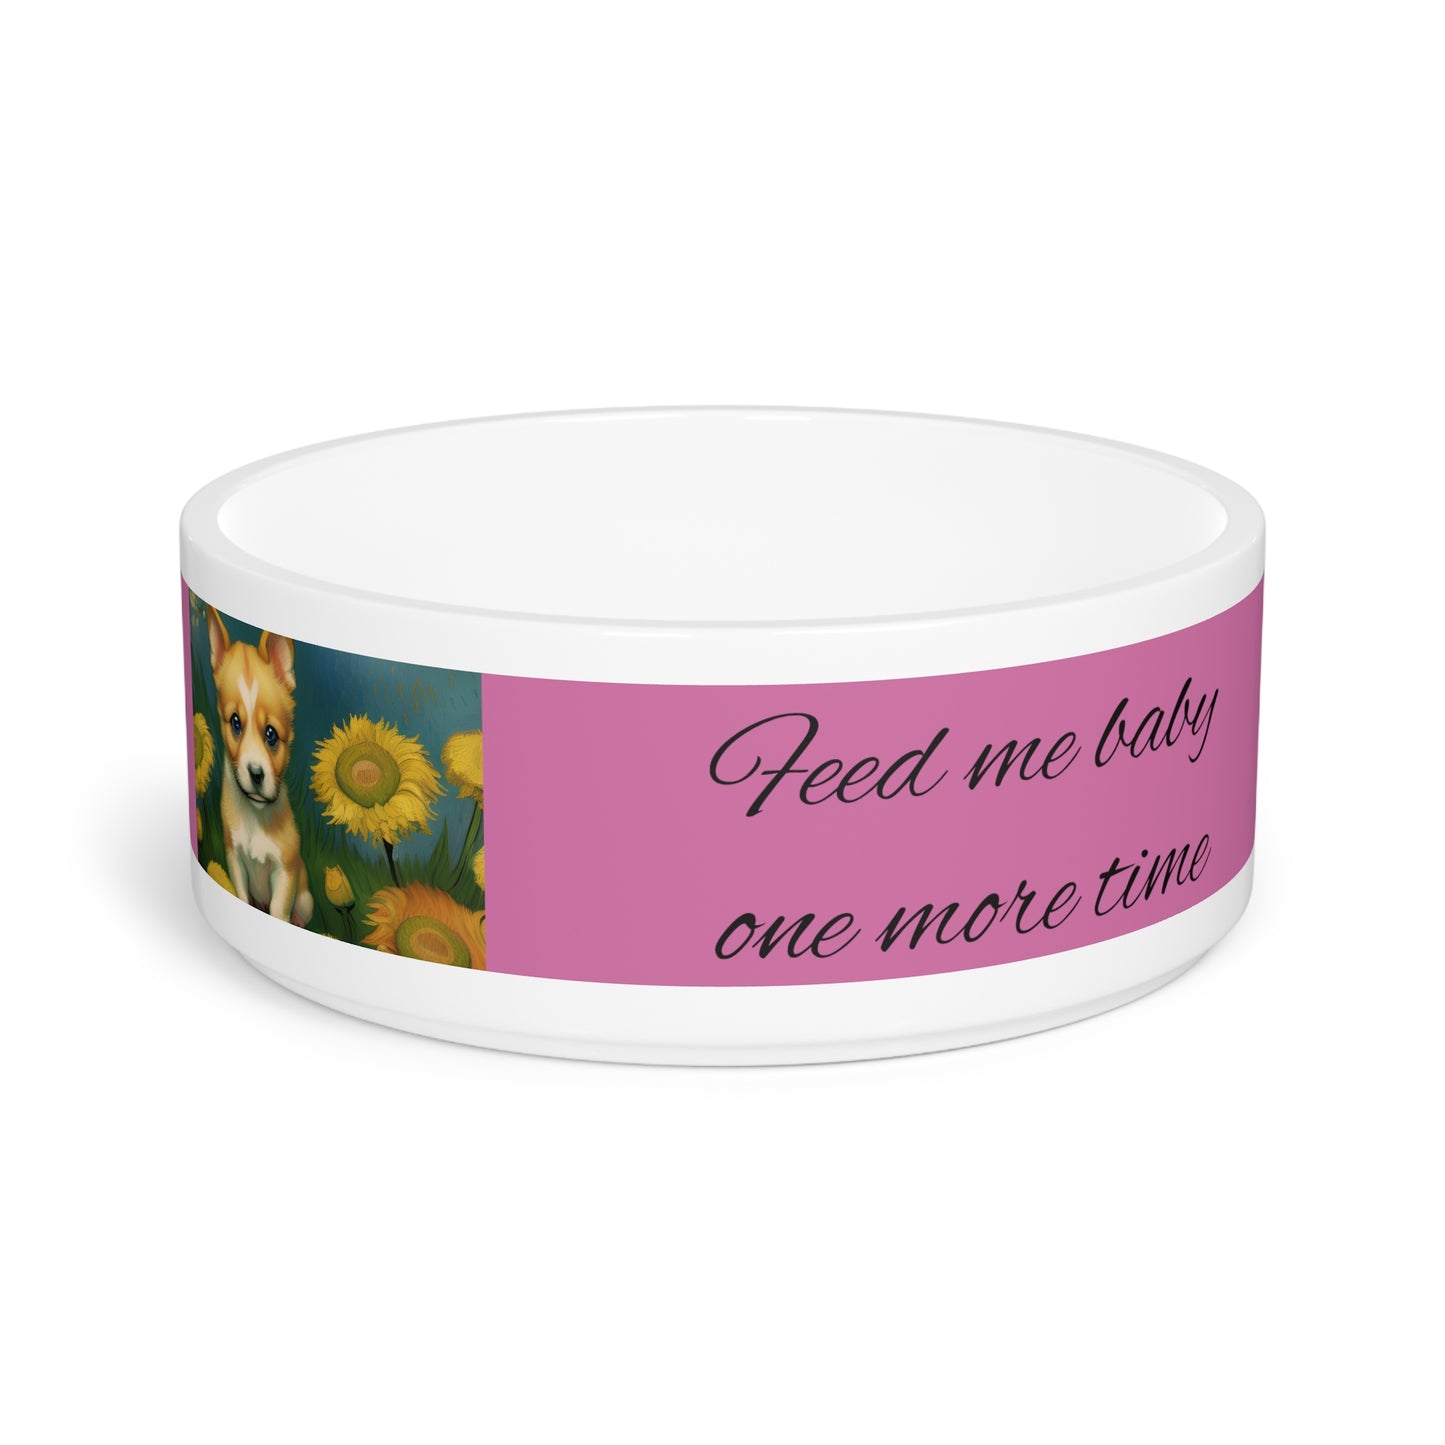 Pet Bowl Feed Me Baby One More Time pink